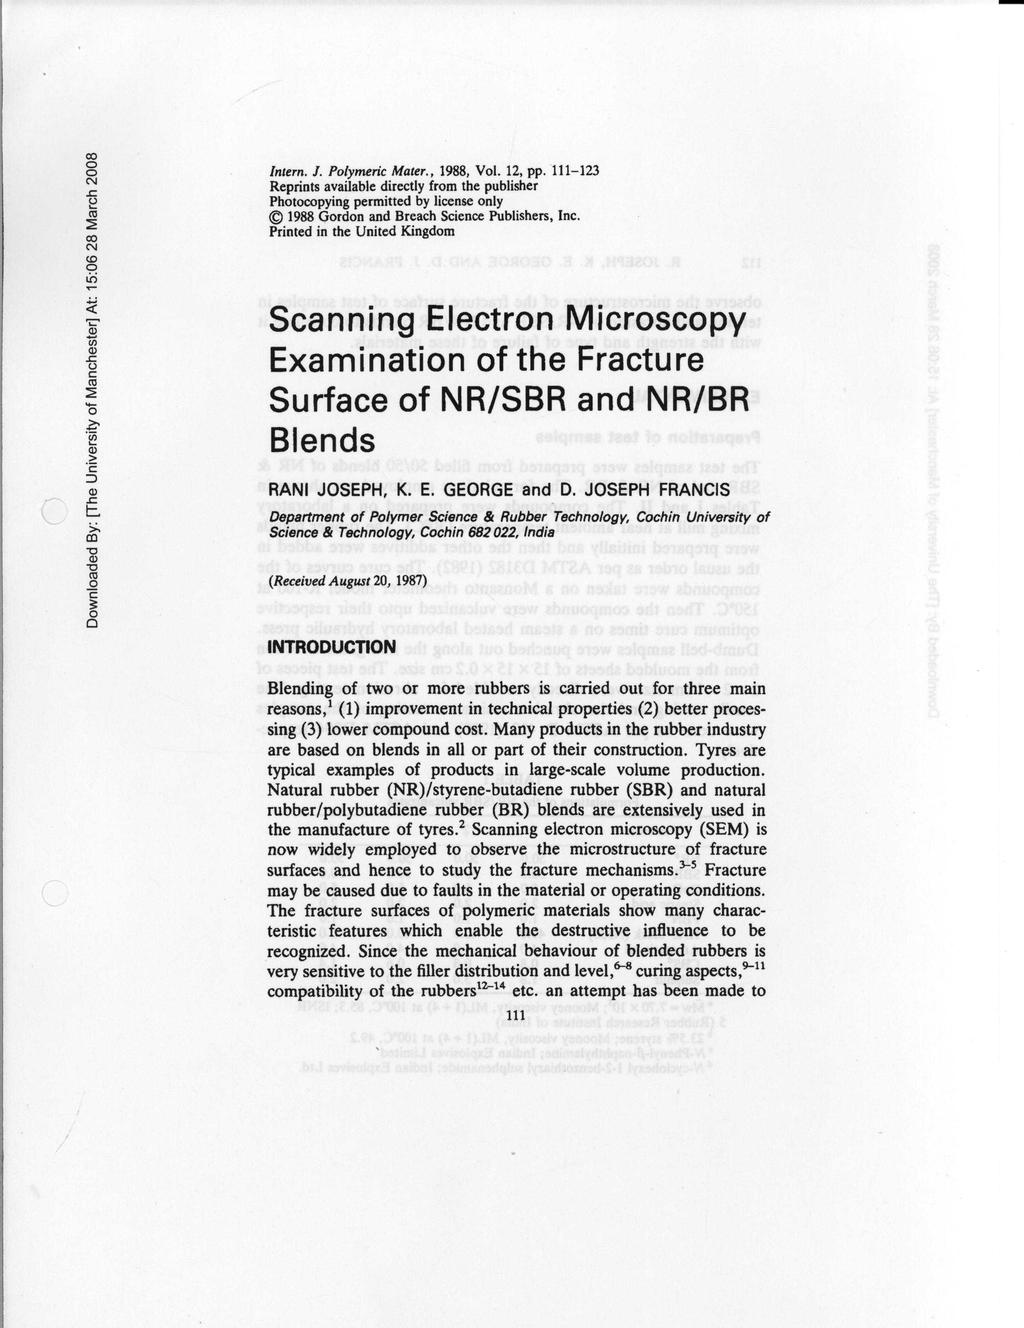 Intern. J. Polymeric Mater., 1988, Vol. 12, pp. 111-123 Reprints available directly from the publisher Photocopying permitted by license only Q 1988 Gordon and Breach Science Publishers, Inc.